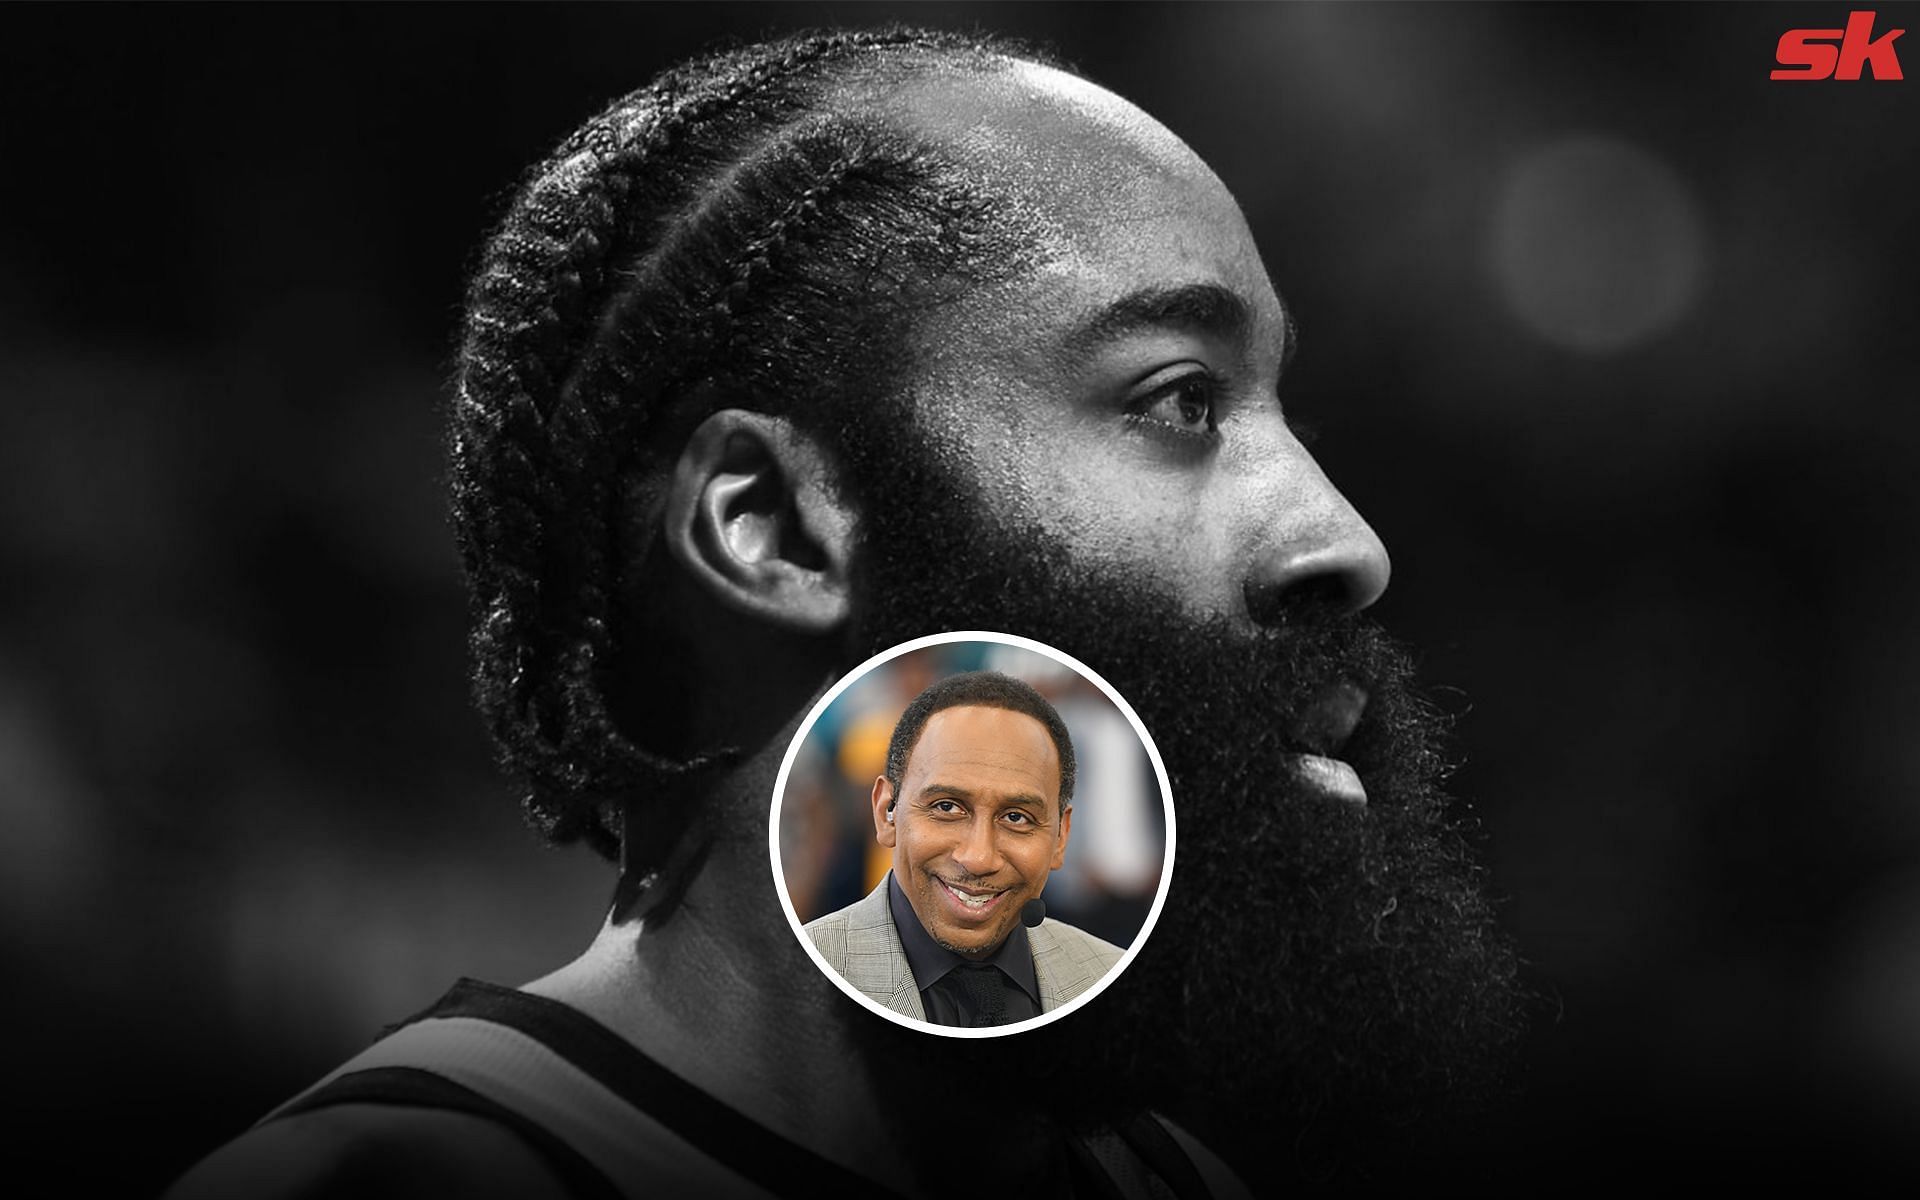 Stephen A. Smith voices his thoughts about Brooklyn Nets superstar James Harden